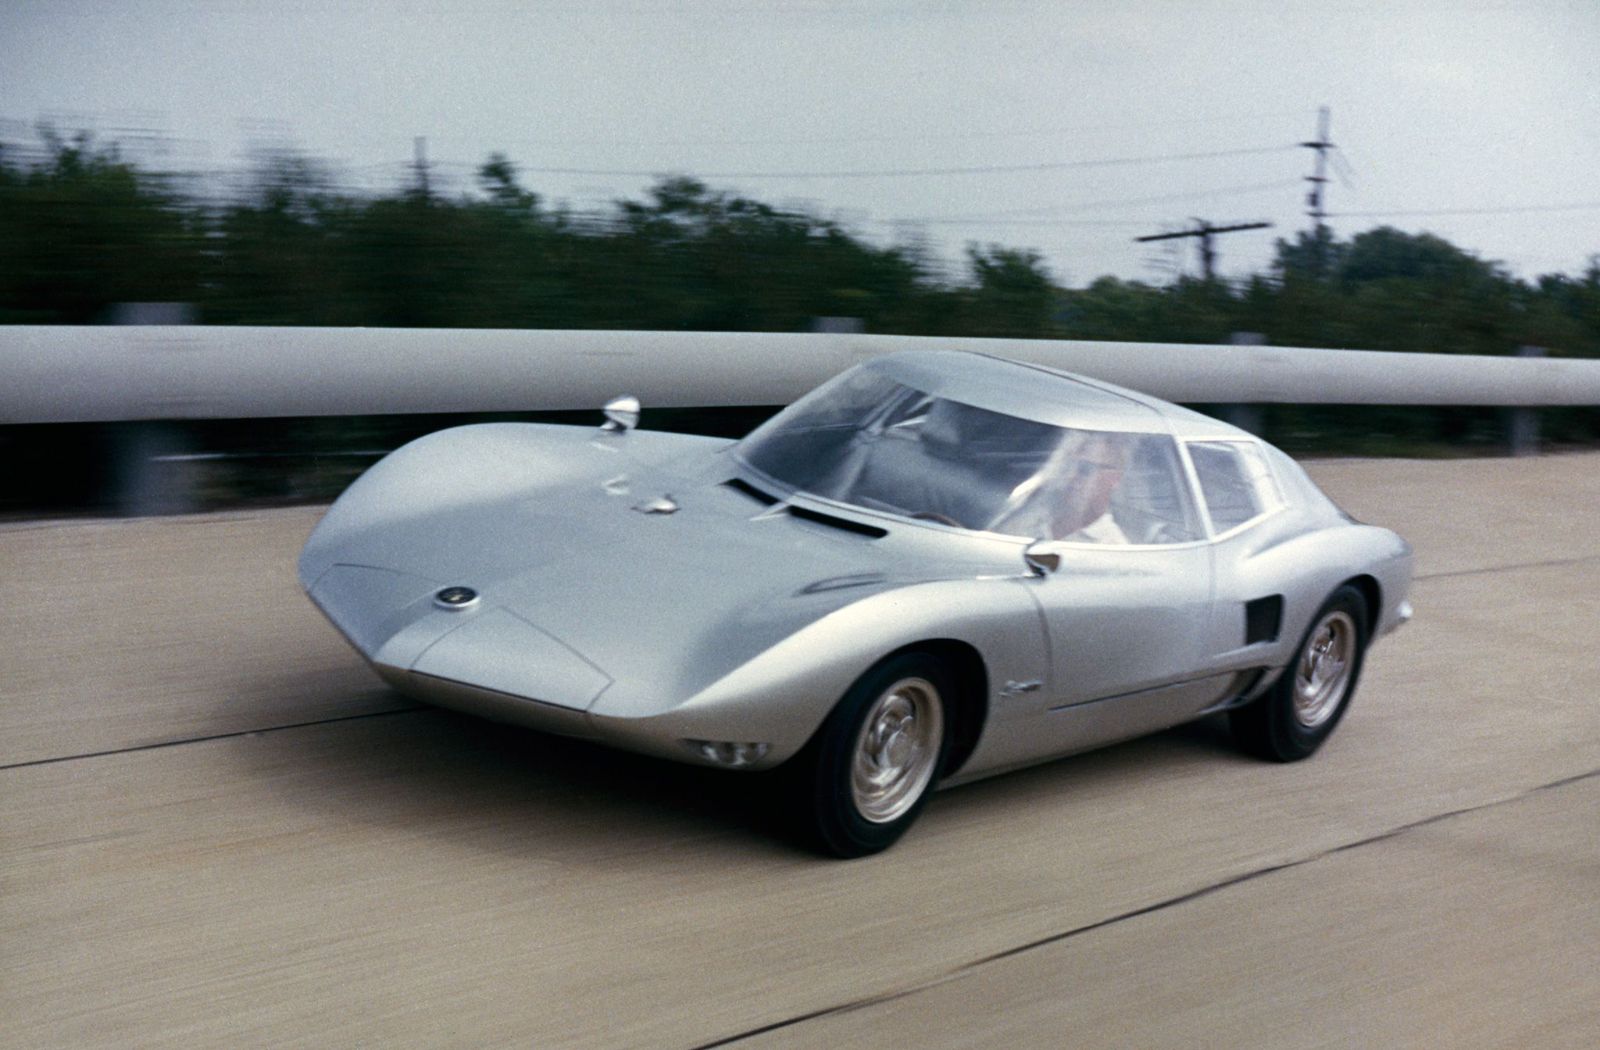  Monza GT Concept: The Early-Sixties Mid-Engine Corvair That's Still Fascinating Today 